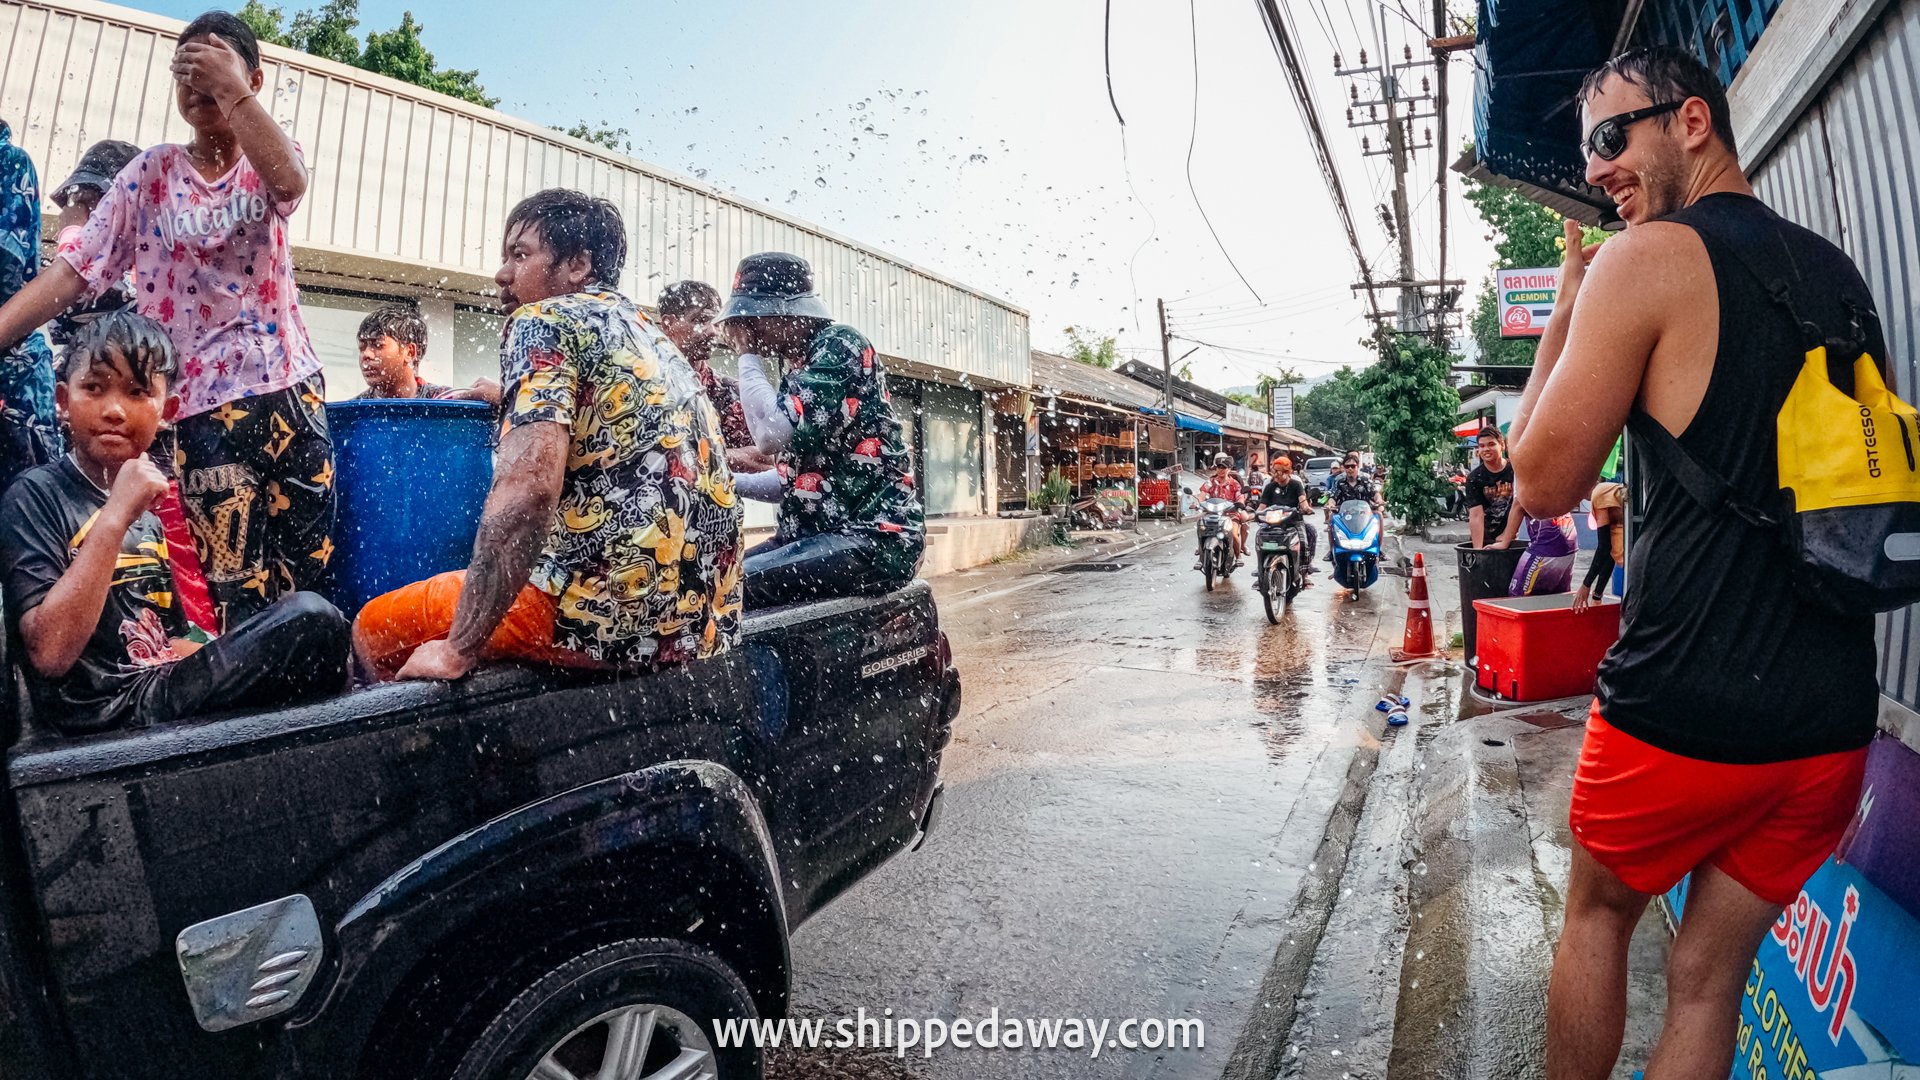 Locals and tourists splashing water during Songkran Festival - Thai New Year water festival - Songkran Festival Thailand